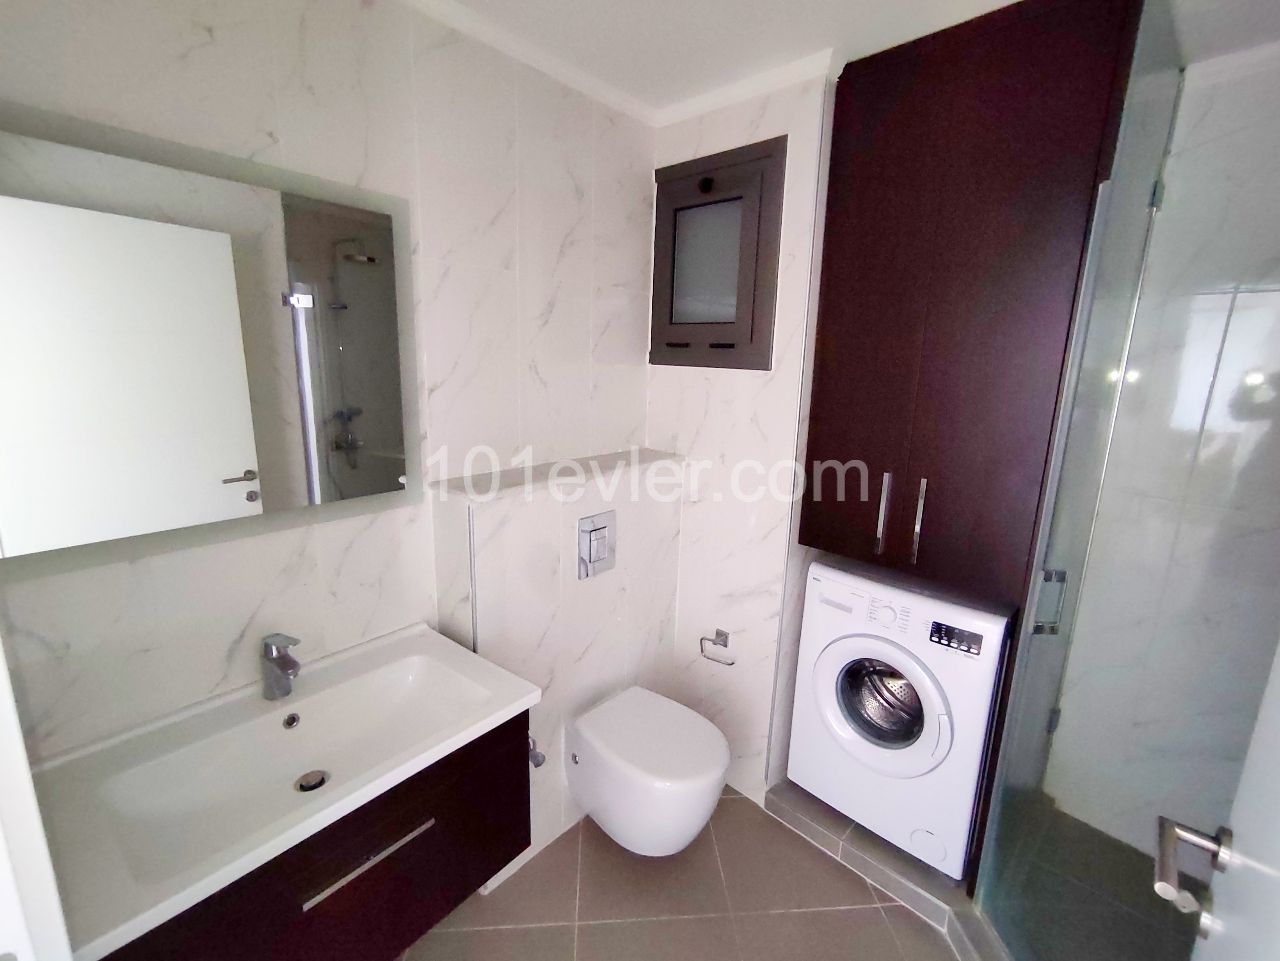 2+1 Flat for Rent in Elegance Complex in the Center of Kyrenia ** 